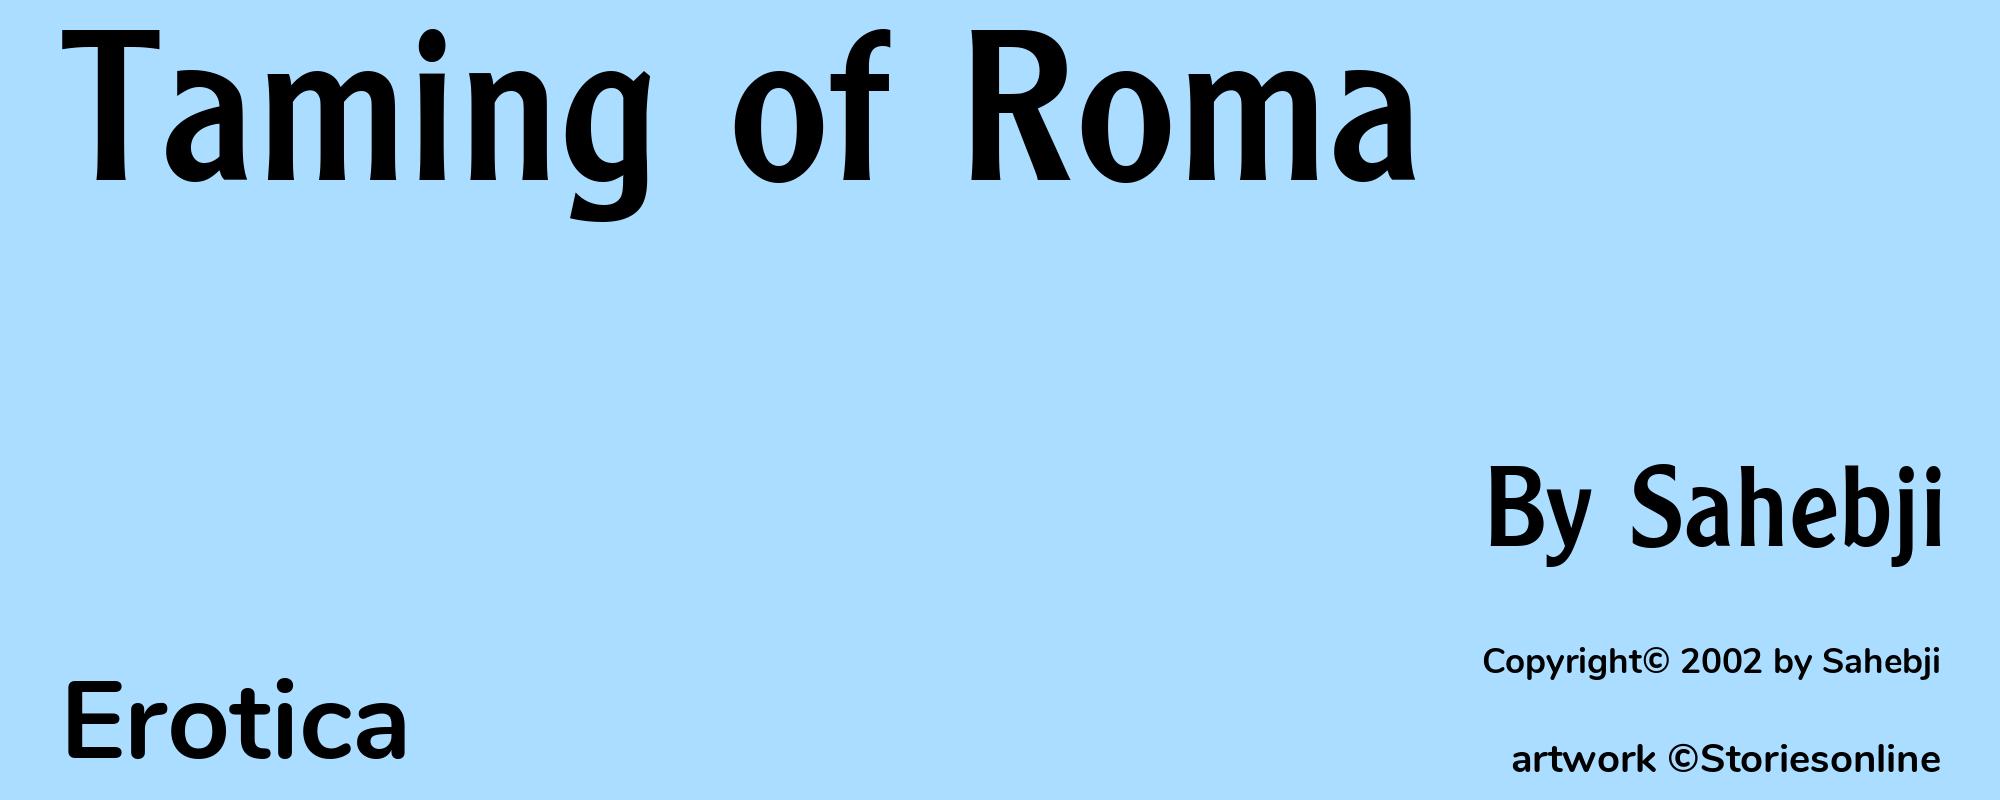 Taming of Roma - Cover